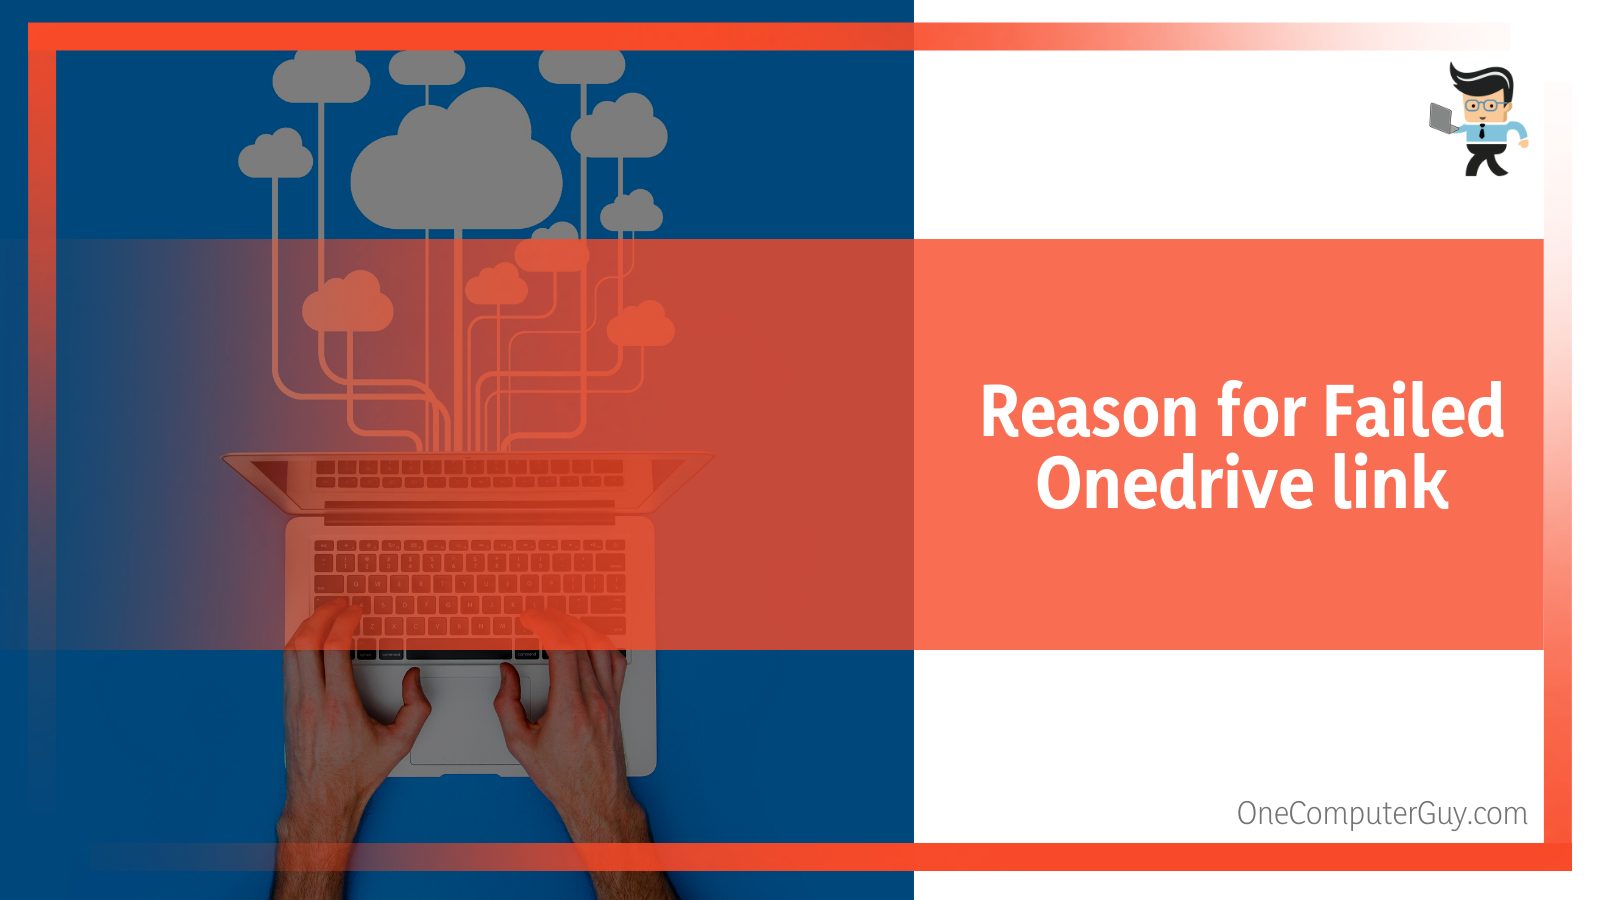 Reasons for failed Onedrive link